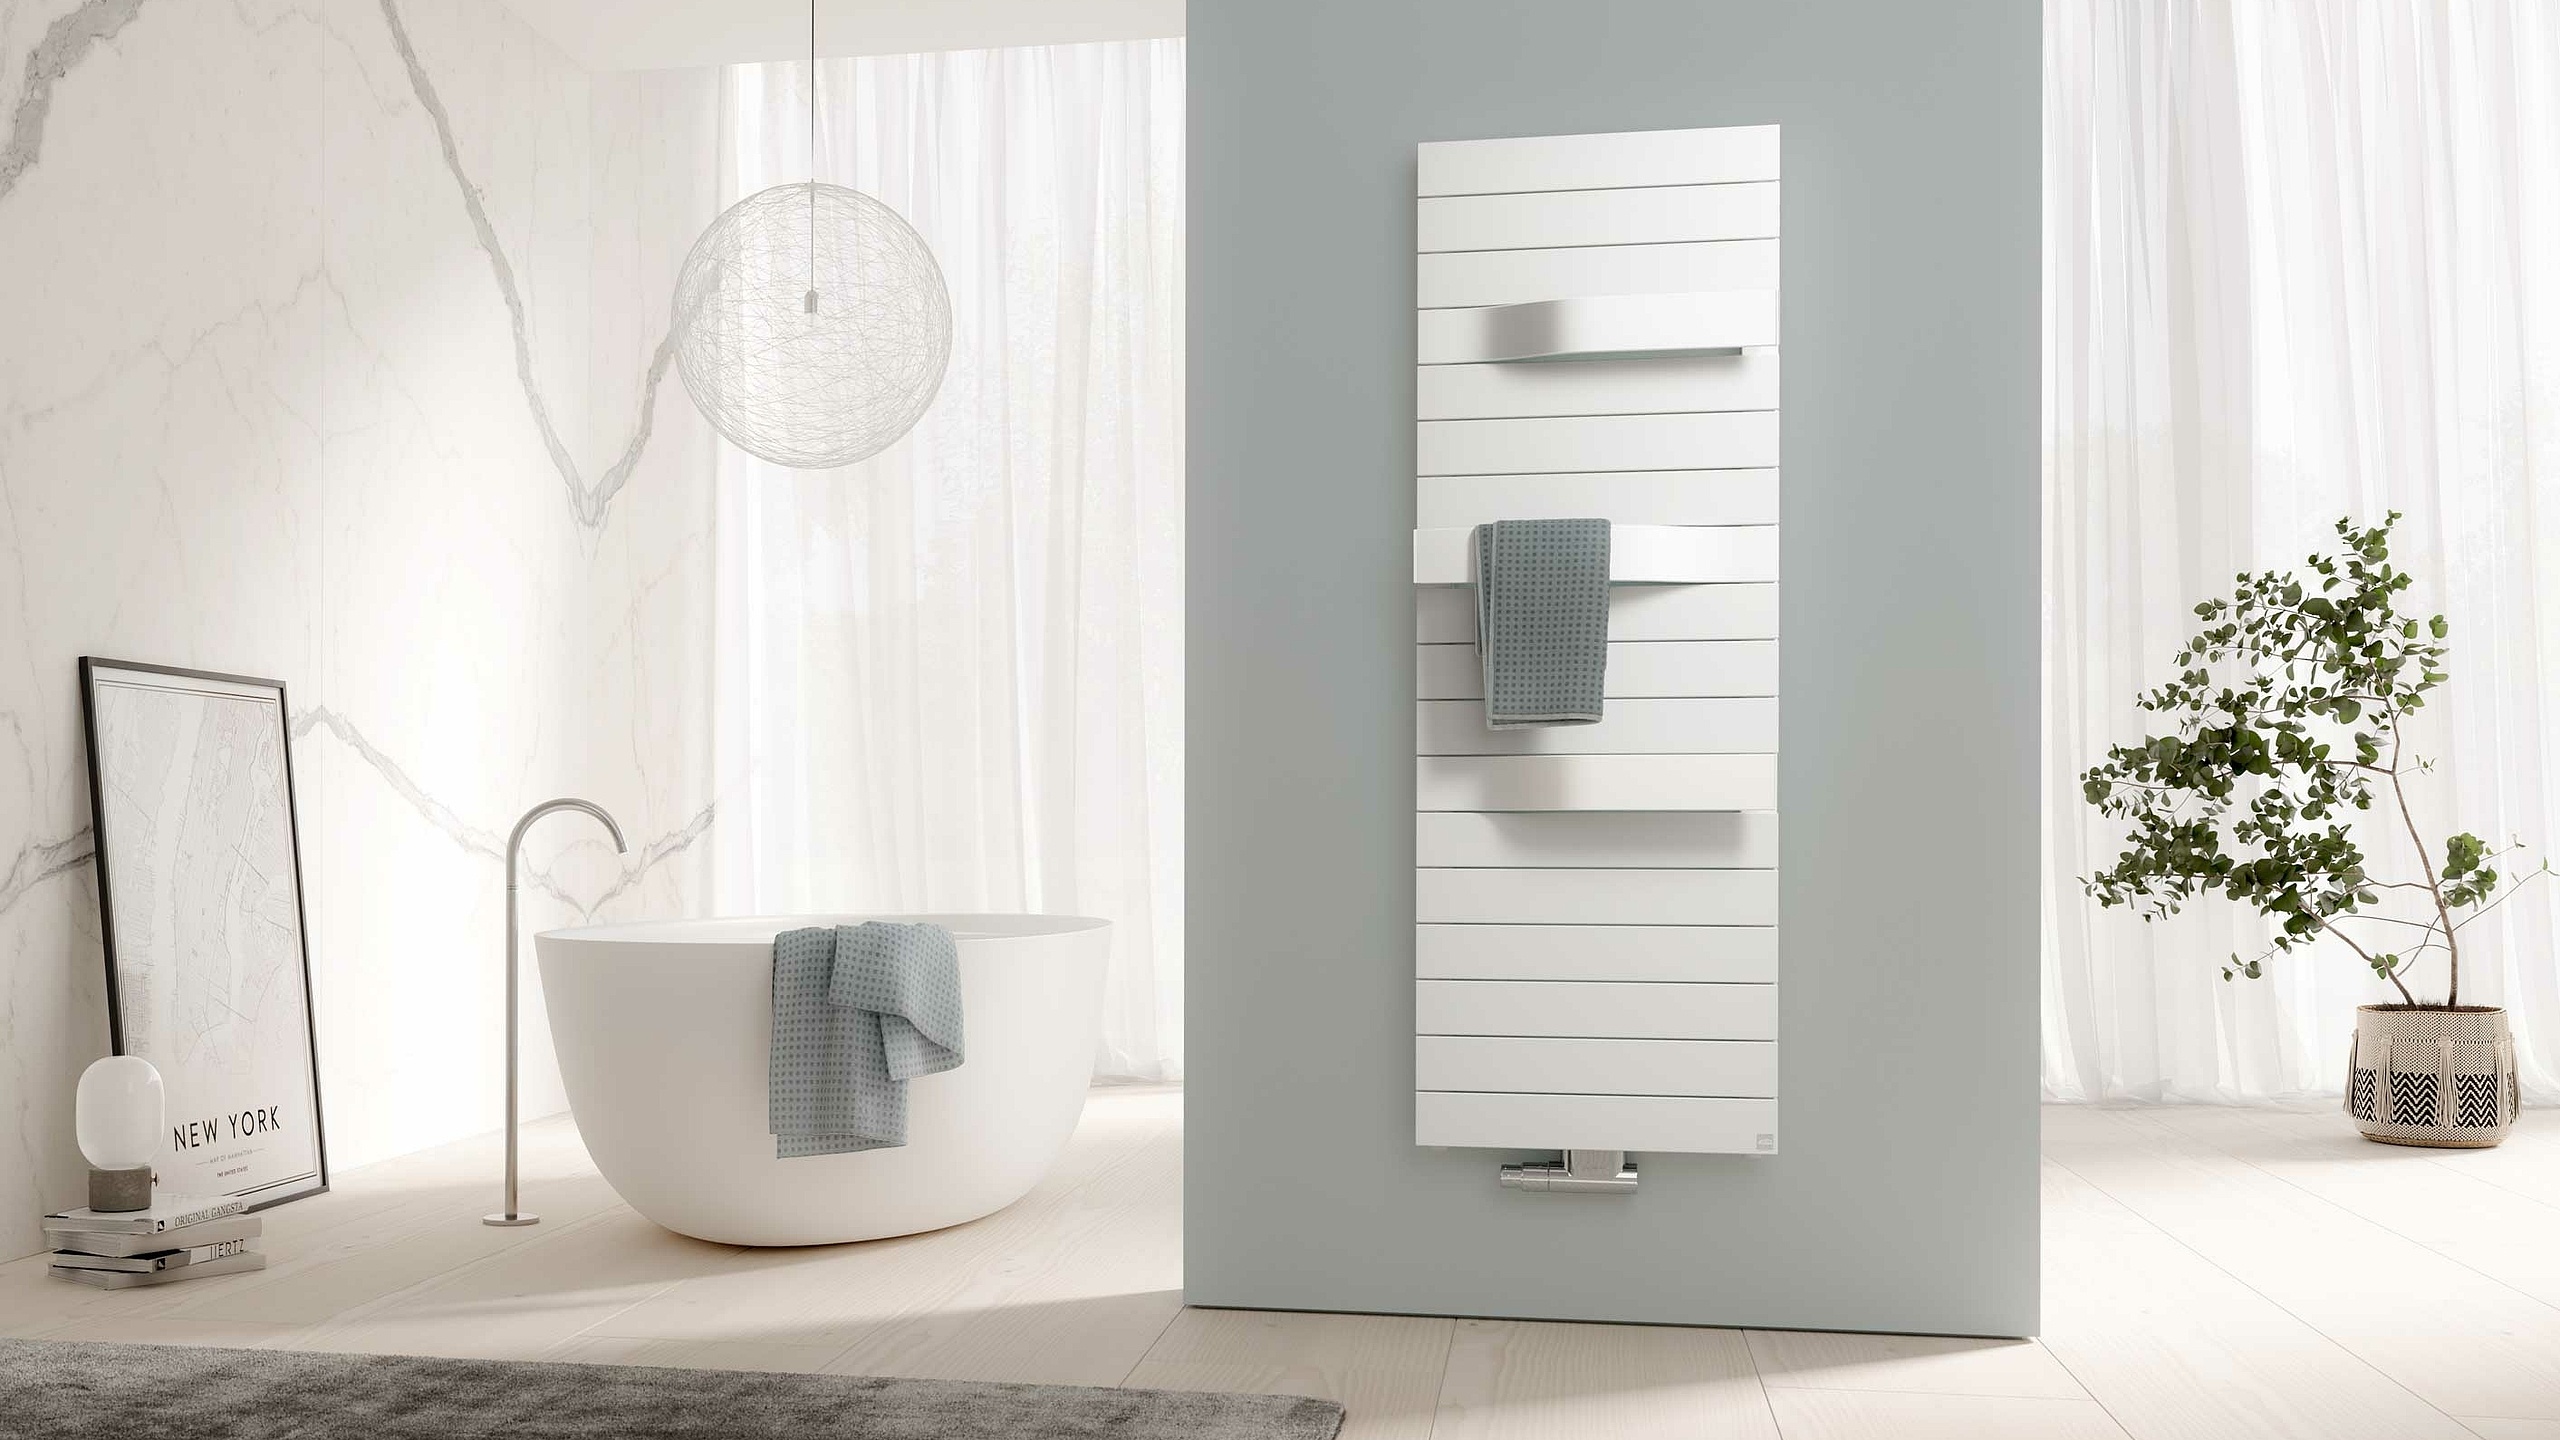 Kermi Tabeo designer and bathroom radiators – experience beauty and comfort in one.